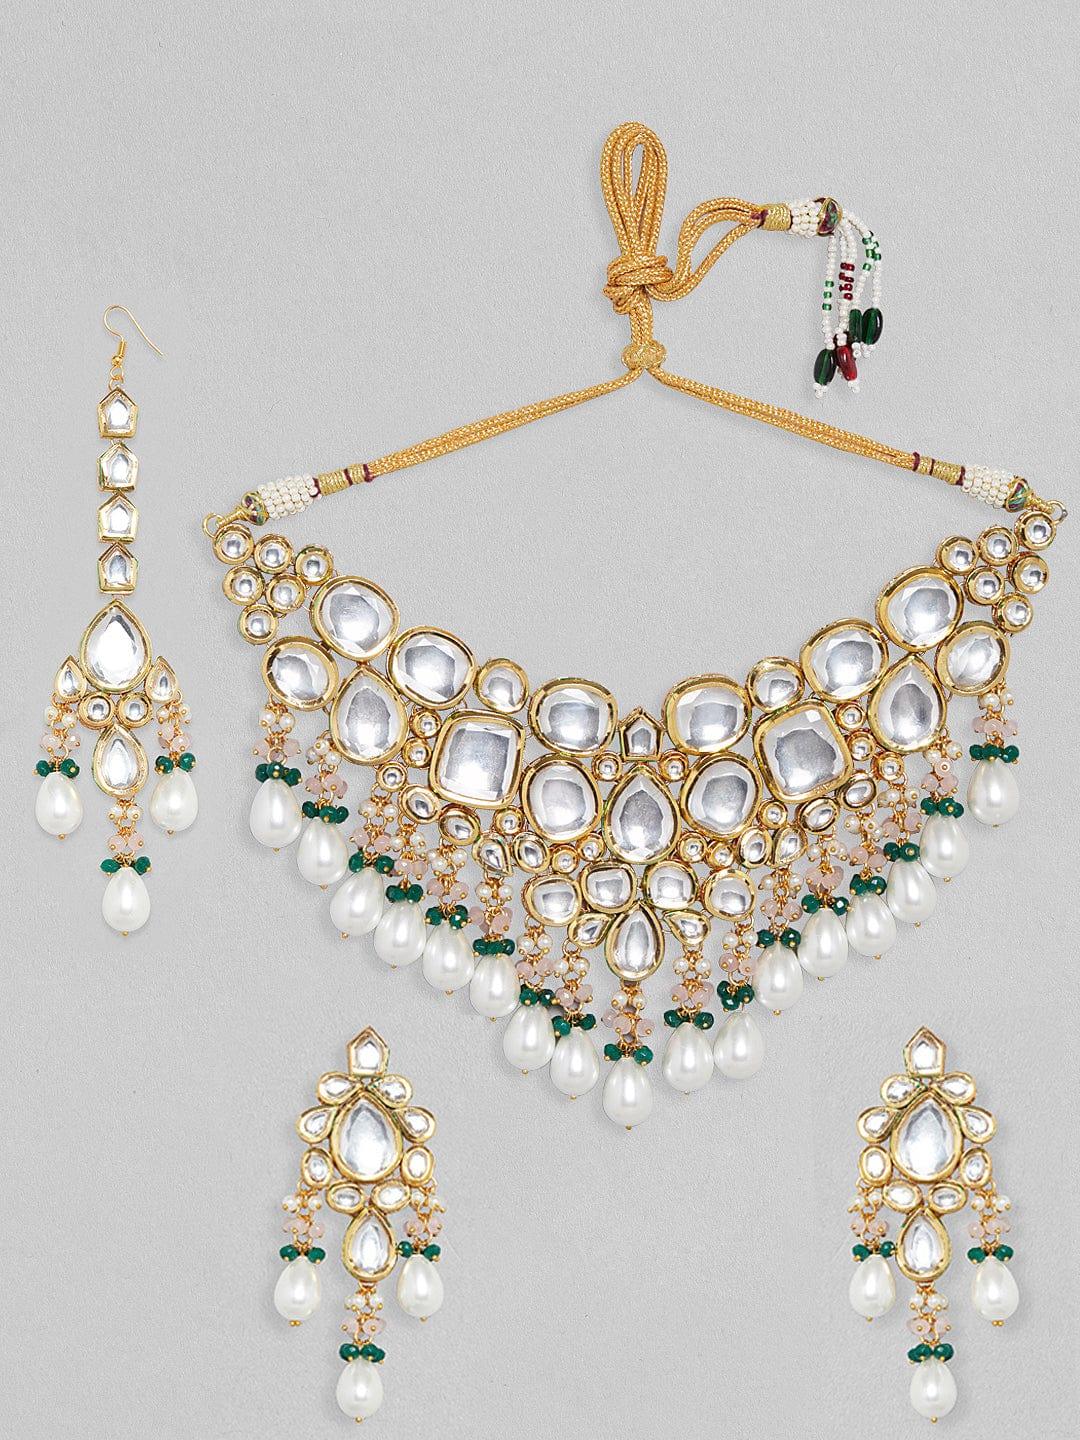 Komal pandey in Rubans 22K Gold Plated Kundan Necklace Set With Green Beads And Pearls - Indiakreations